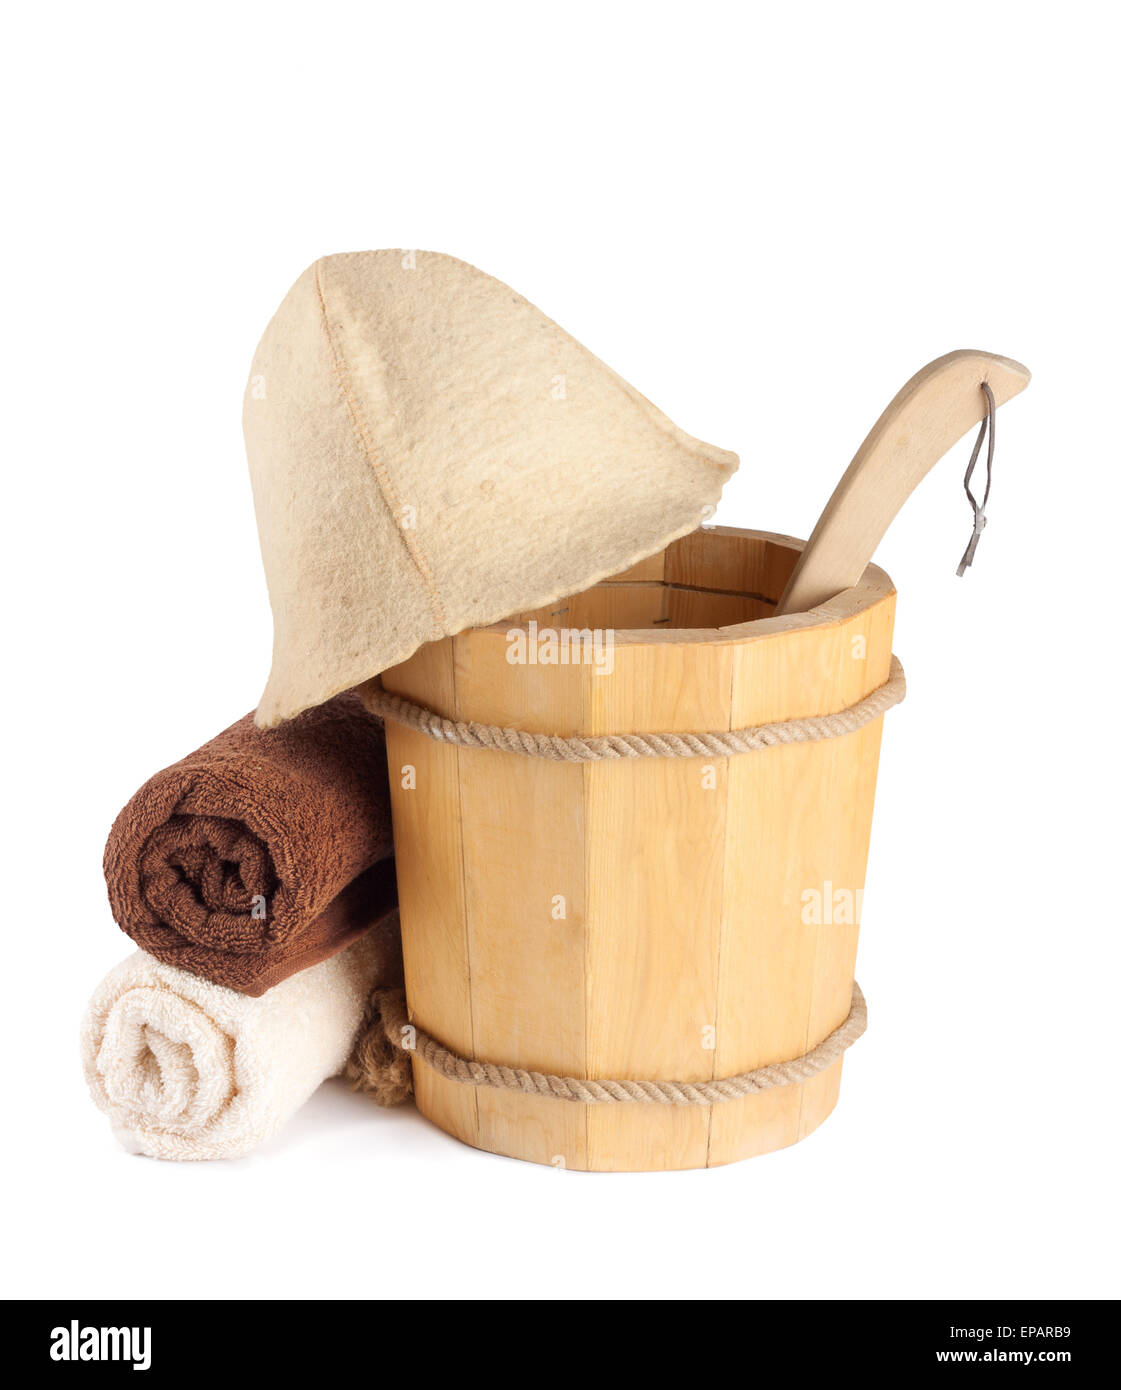 Wooden bucket with ladle and towels for the sauna Isolated on white background Stock Photo